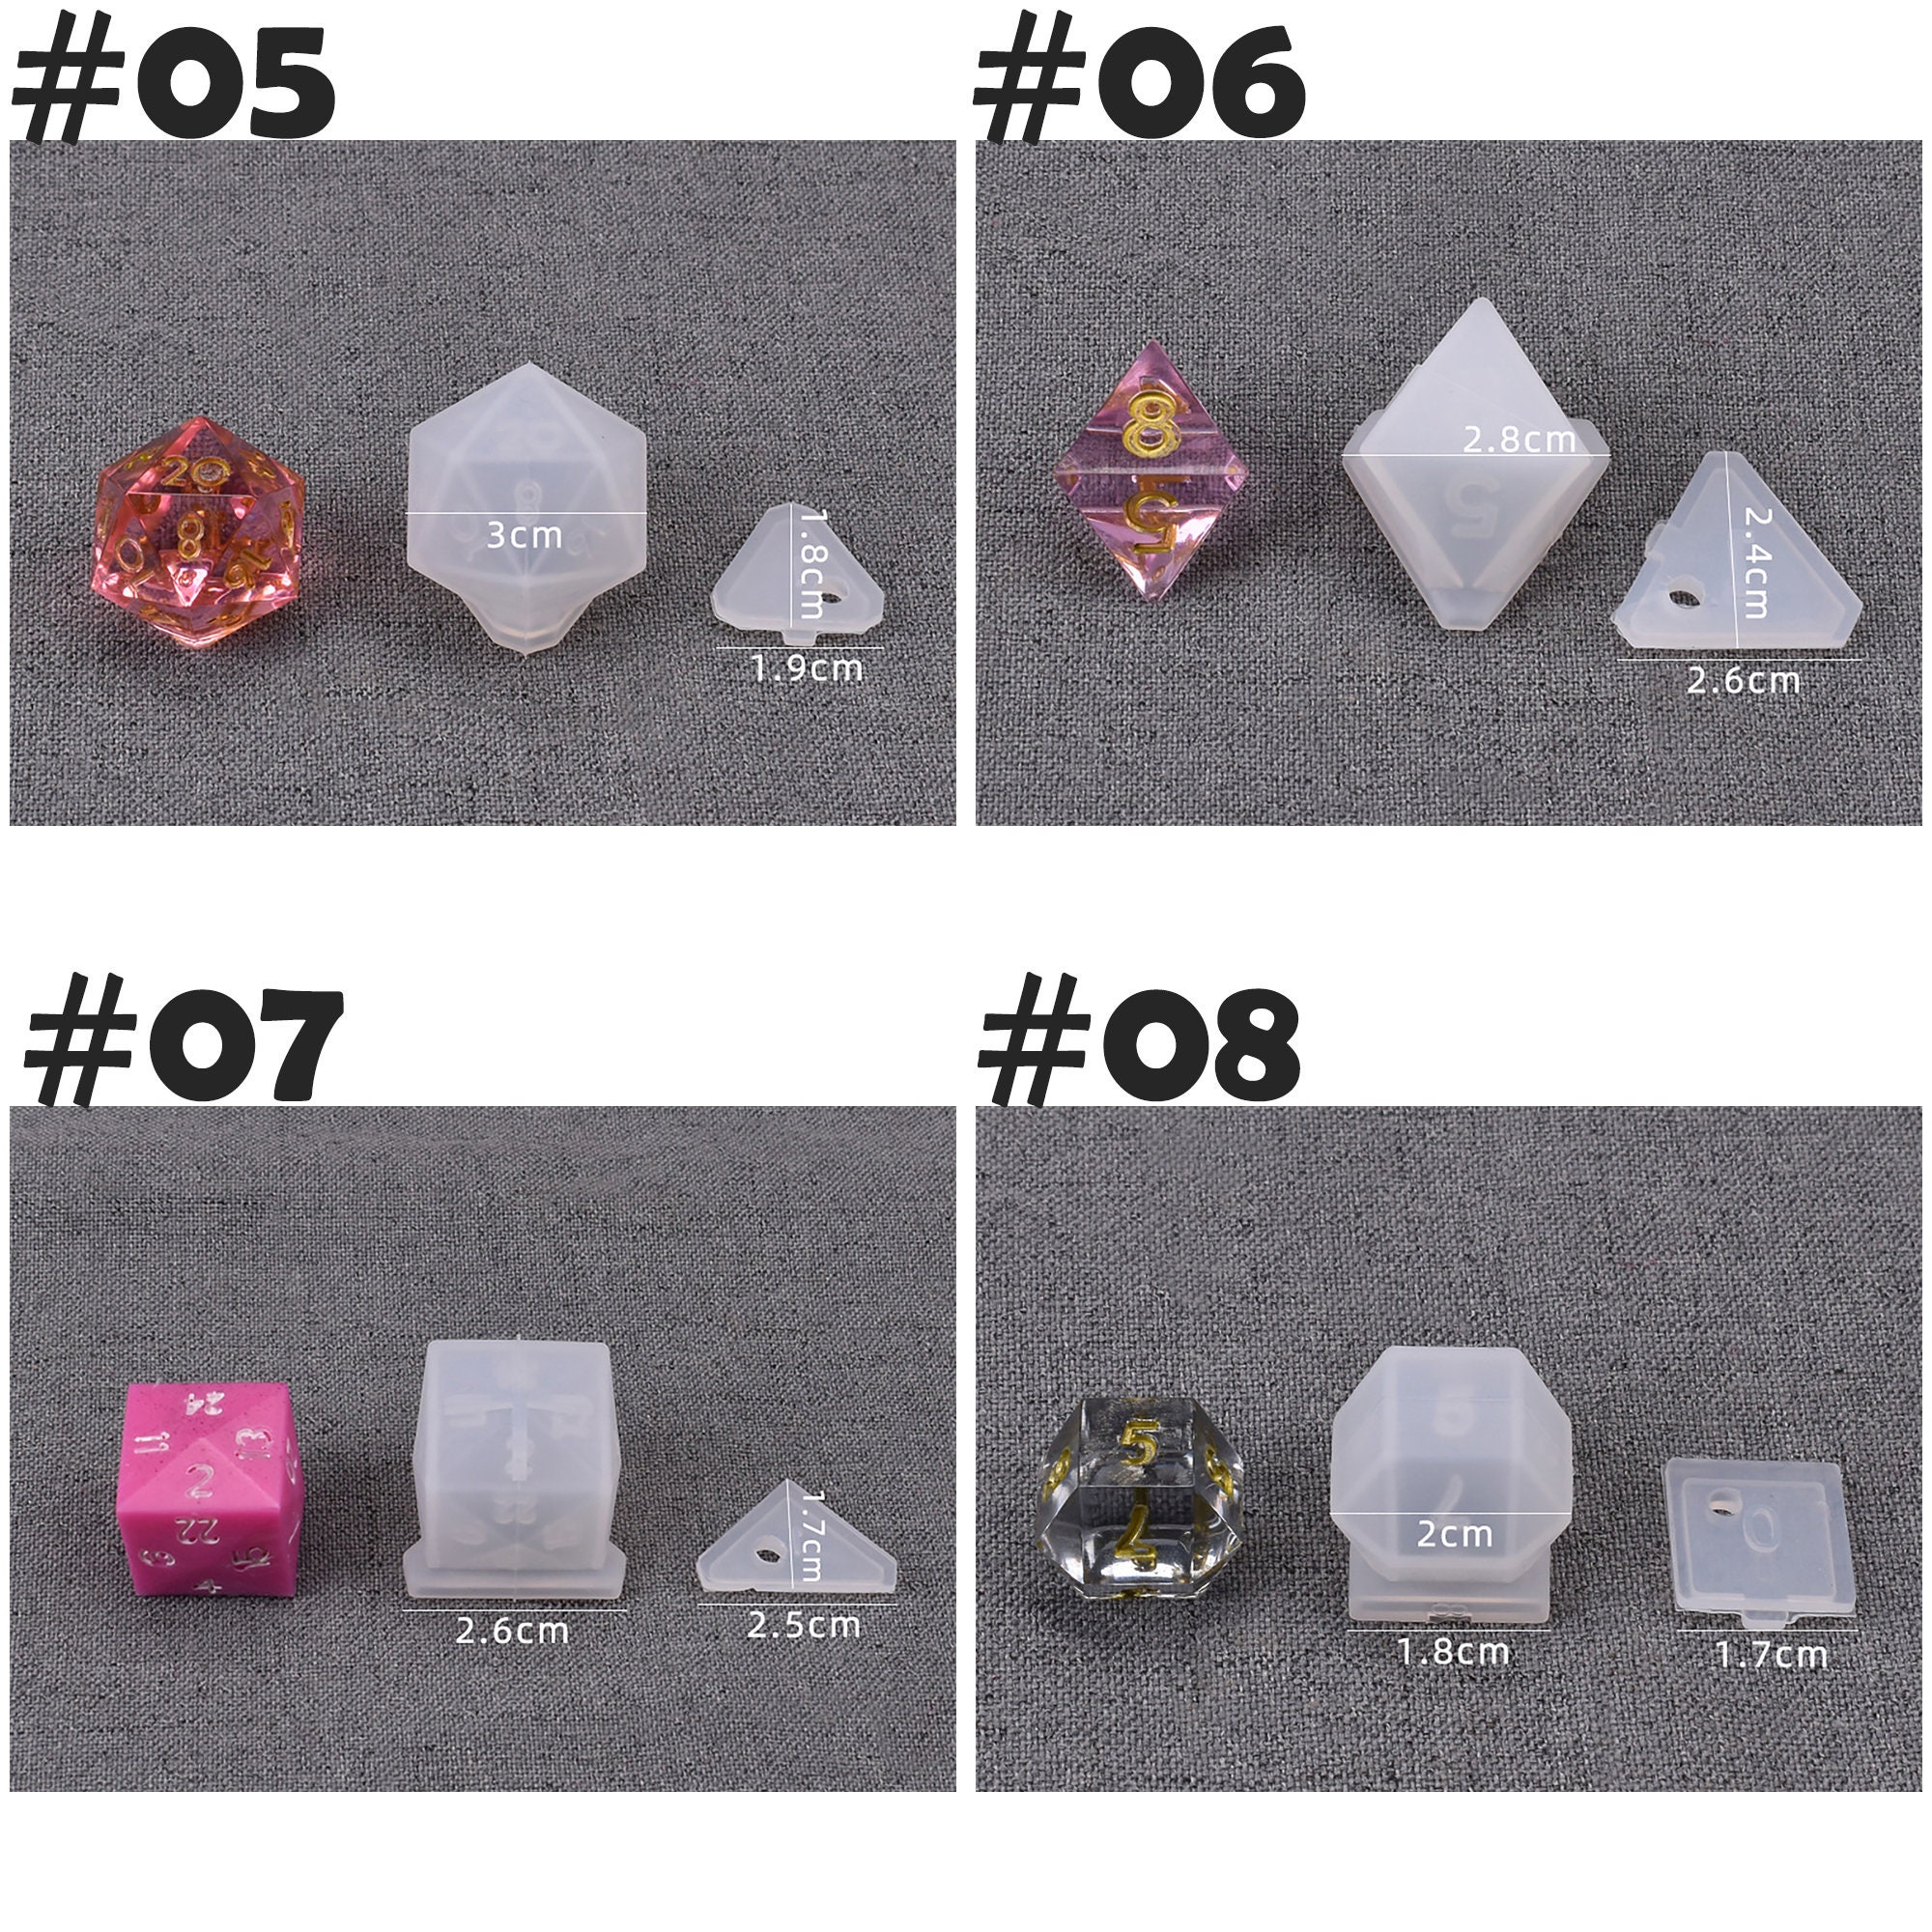 Dice Resin Mold, Polyhedral Game Dice Molds, Multi-Faceted Dice